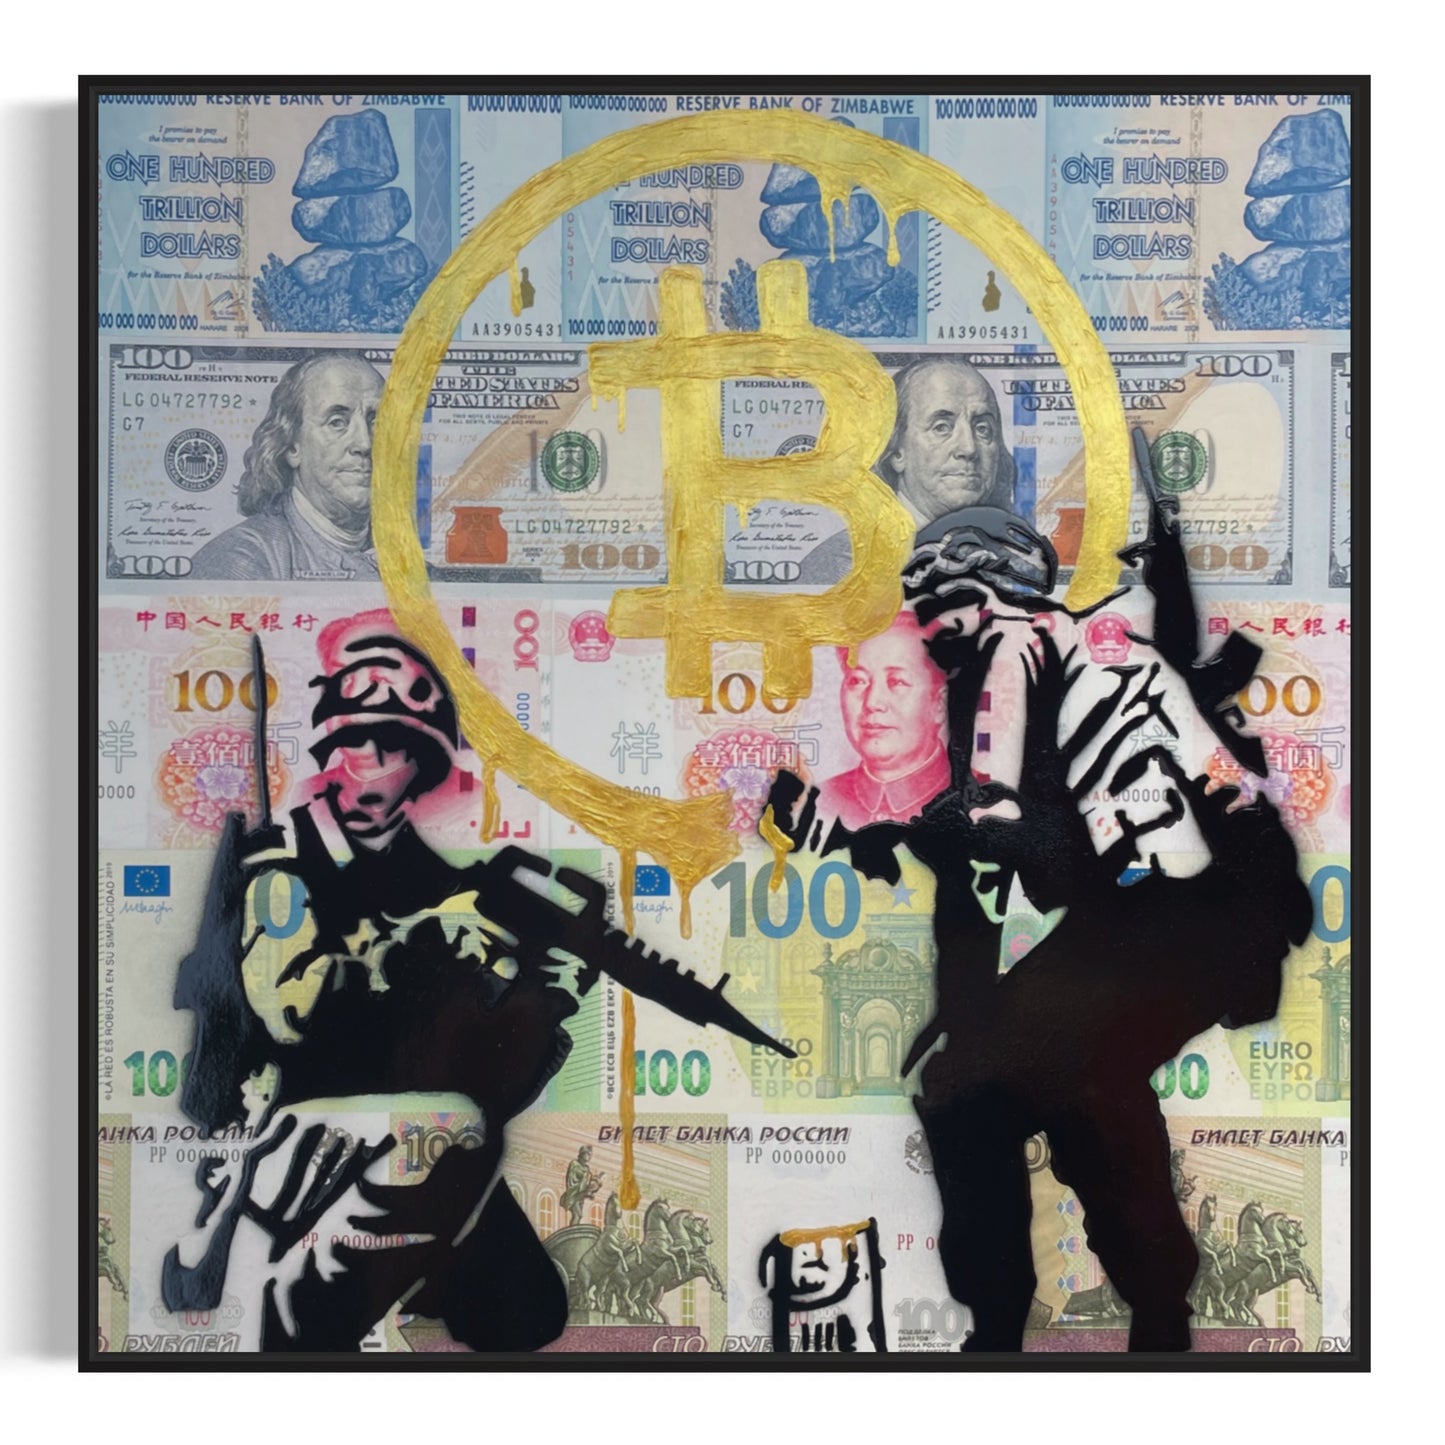 Acrylic and Spray Paint Gold Edition "Make war unaffordable"